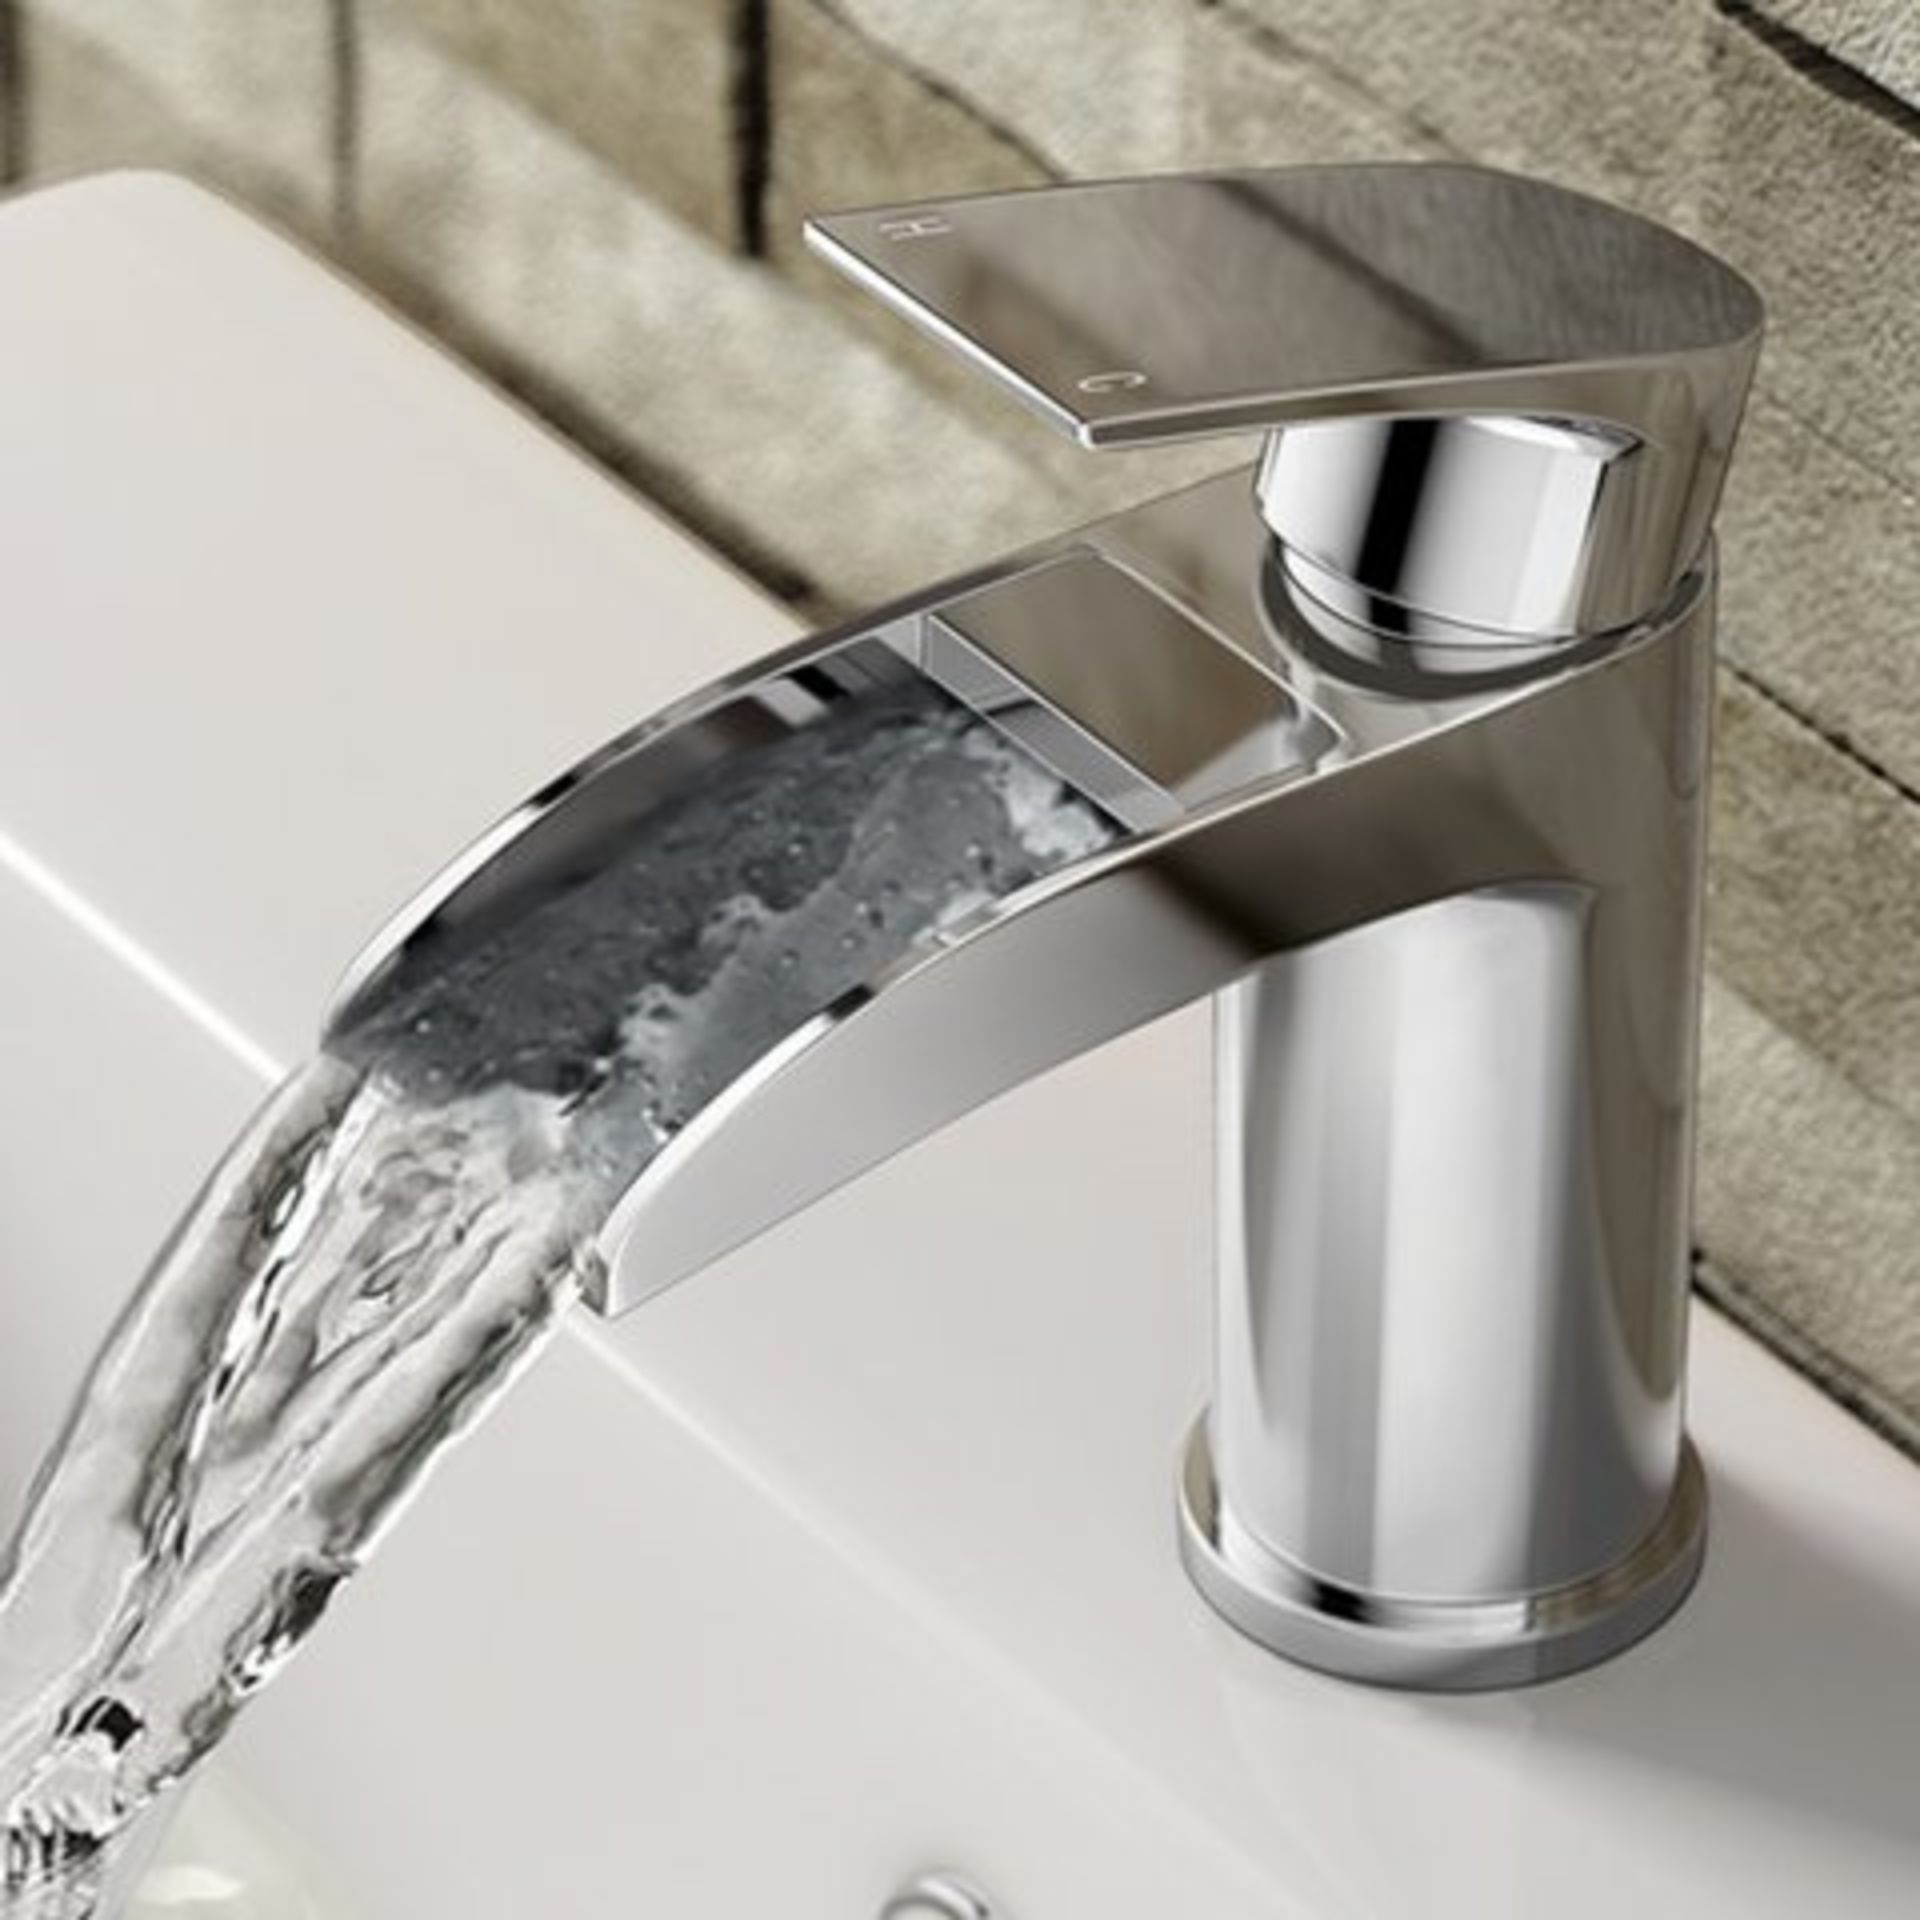 (H41) Avis II Waterfall Basin Mixer Tap Waterfall Feature Our range of waterfall taps add a touch of